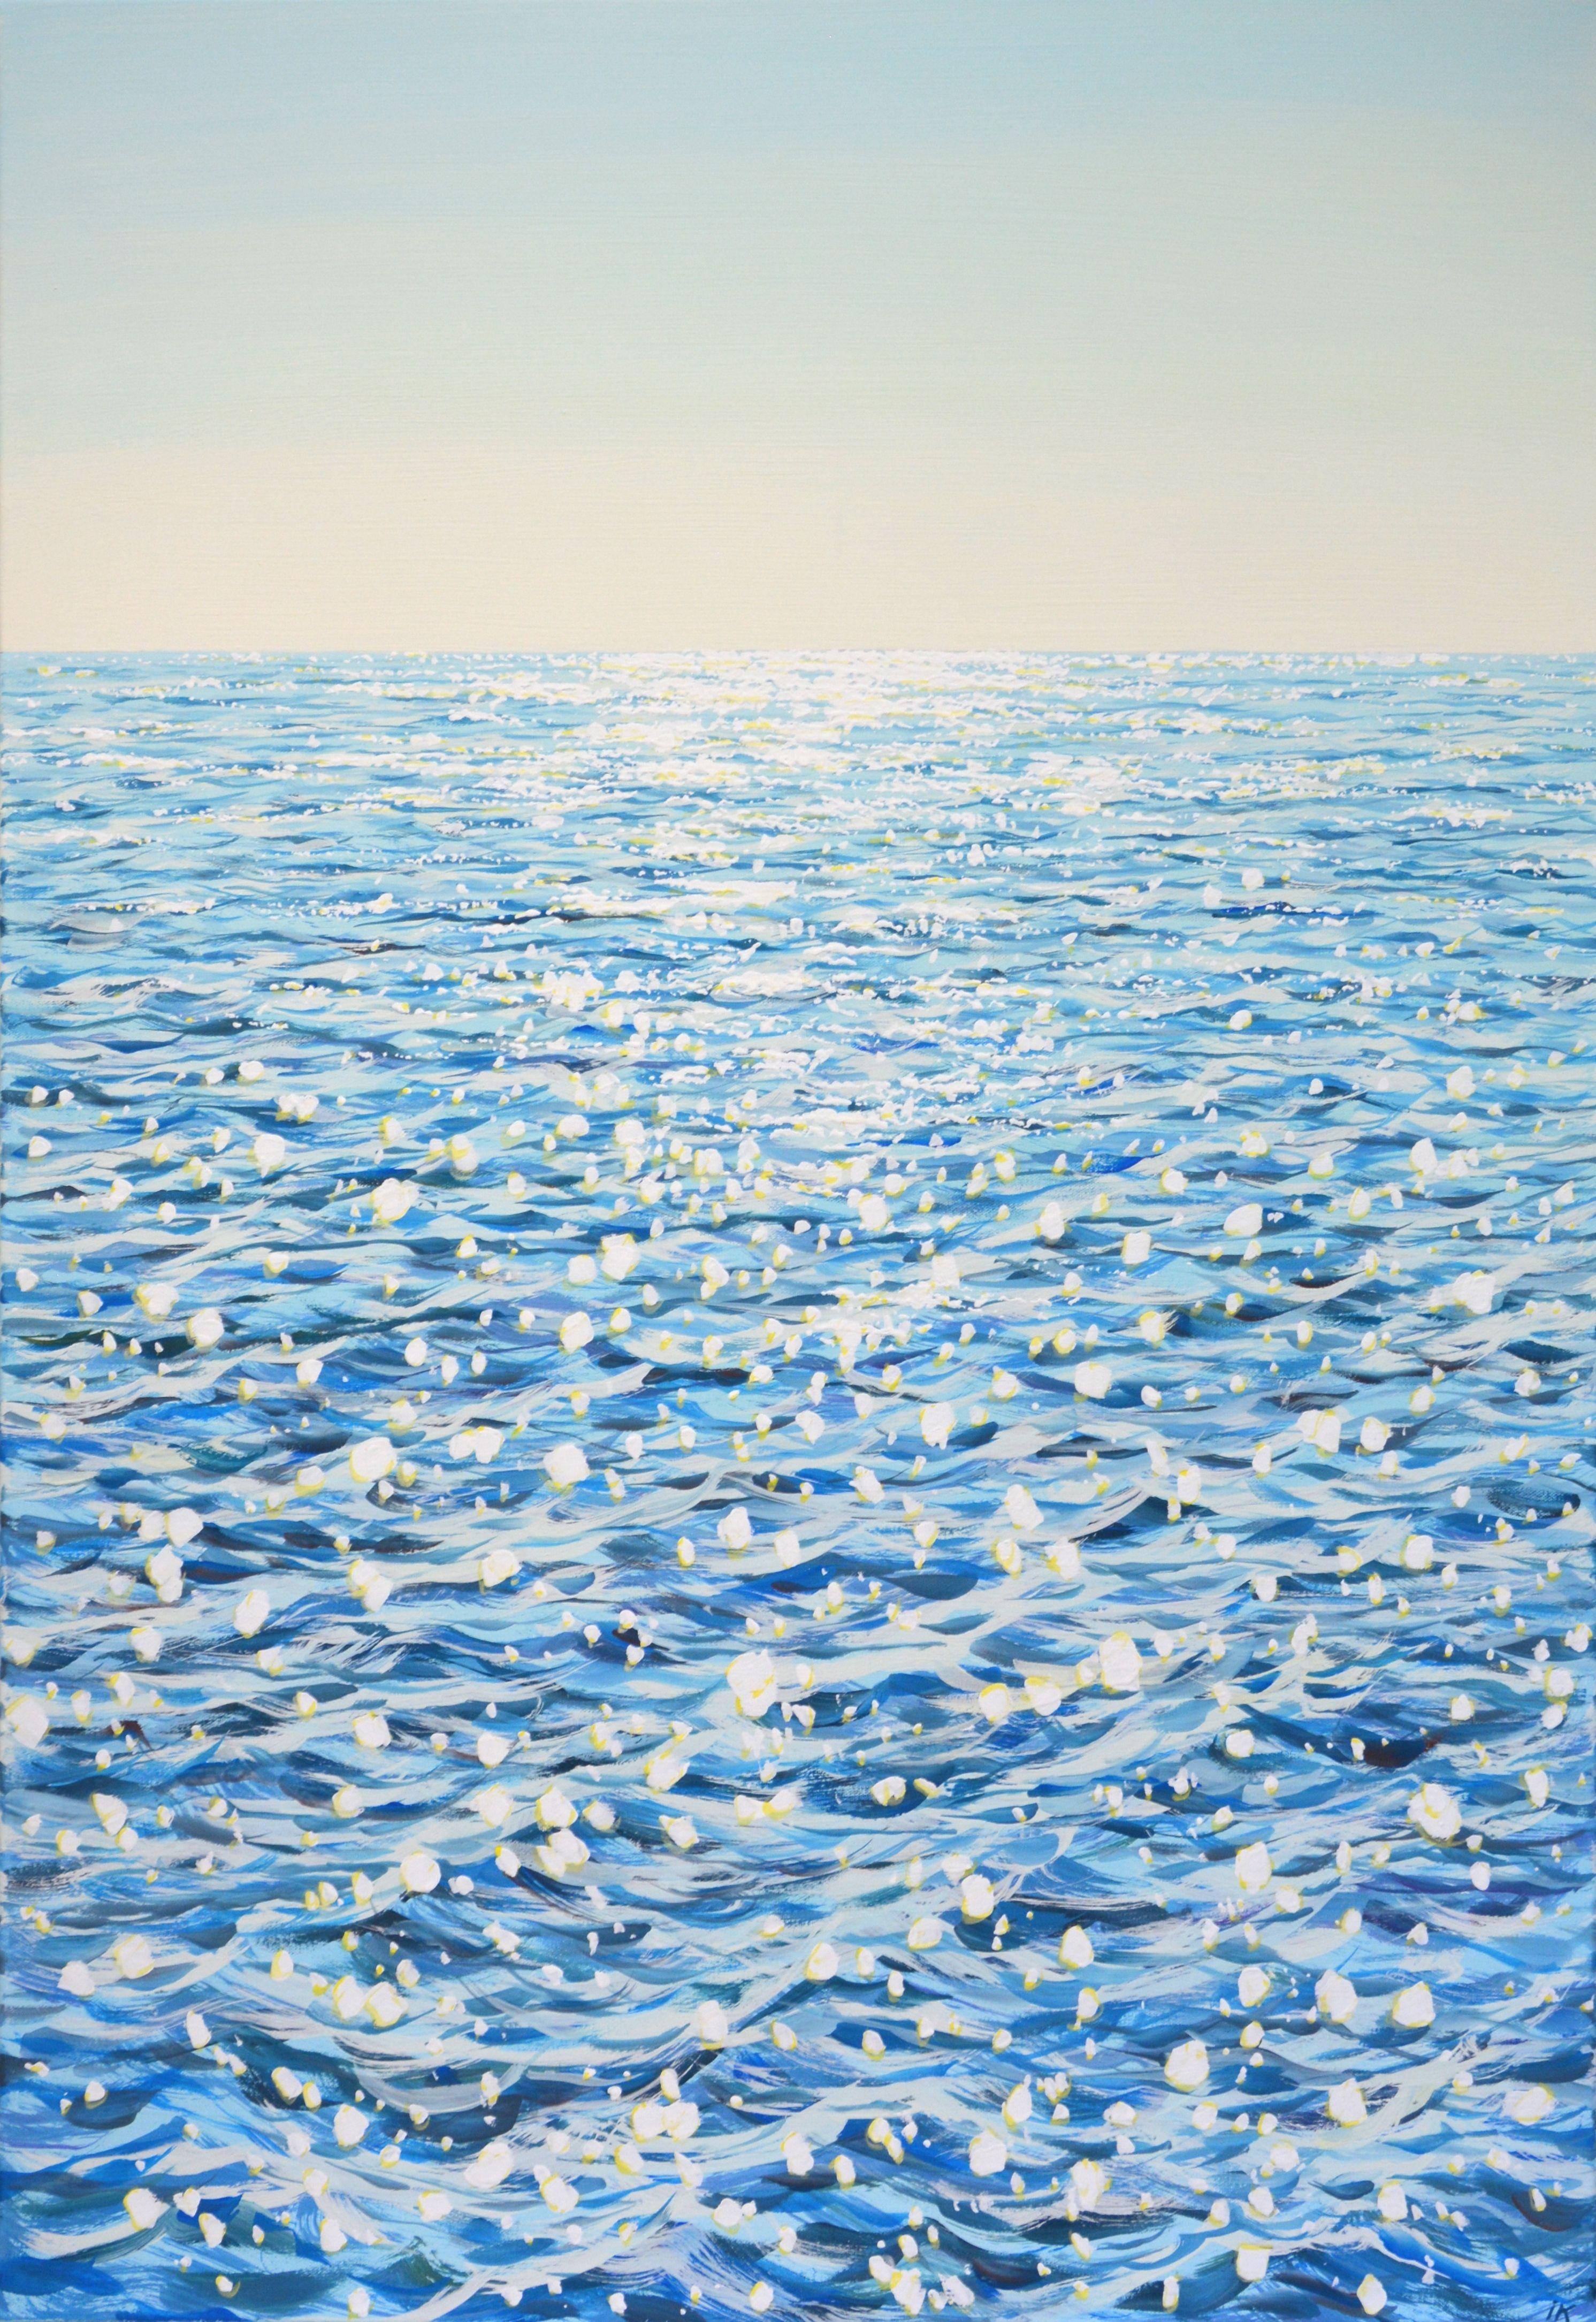 Ocean light 3. Blue water, ocean, water glare, clear sky, create an atmosphere of relaxation and romance. Made in the style of realism, light blue, white palette emphasizes the energy of water. Part of a permanent series of seascapes. The picture is